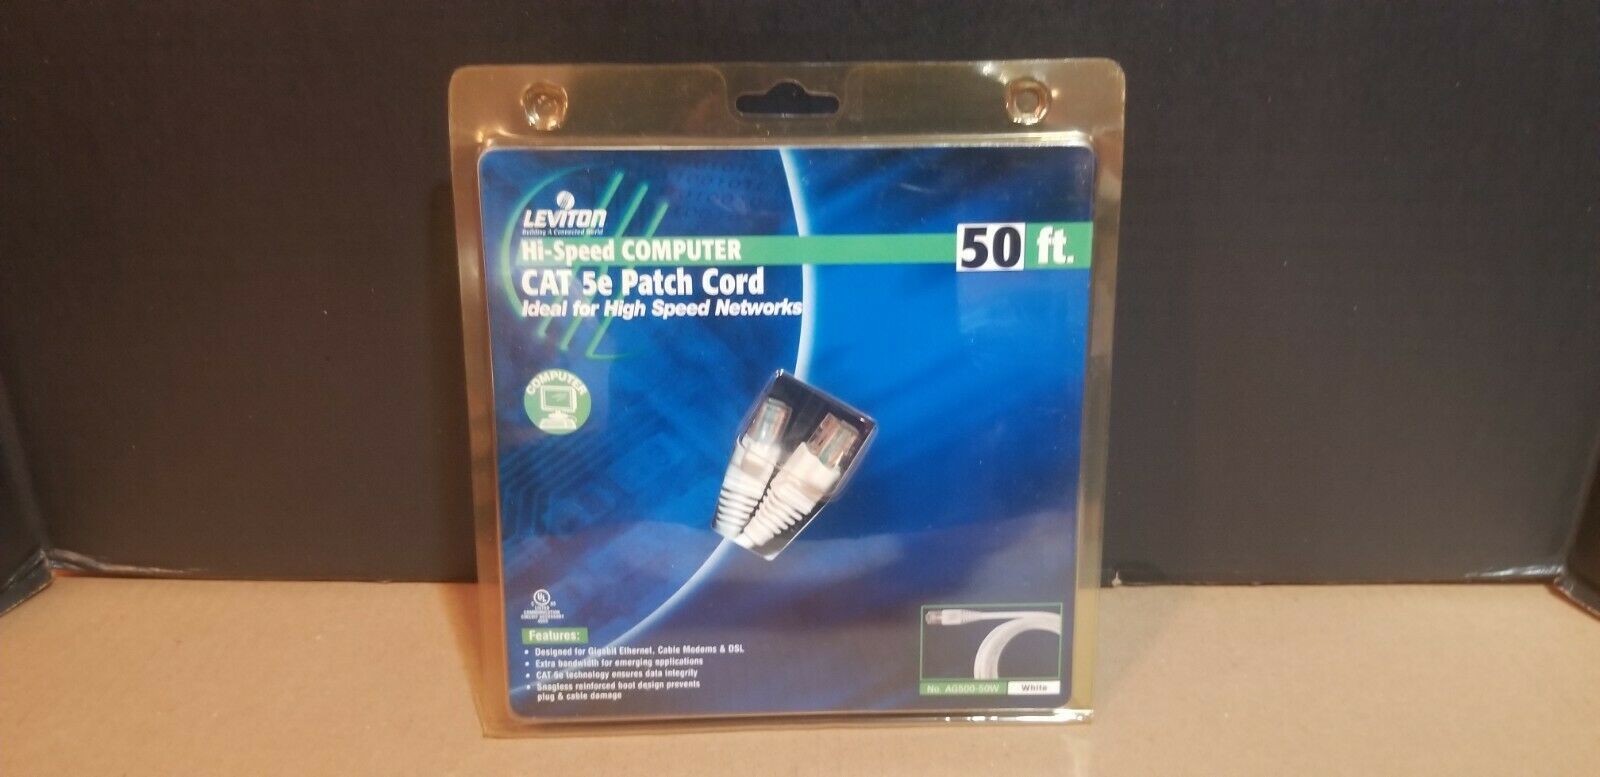 Leviton Cat 5e 50 Ft Ethernet LAN Patch Cord Network Cable Booted 5G455-50G - $12.37